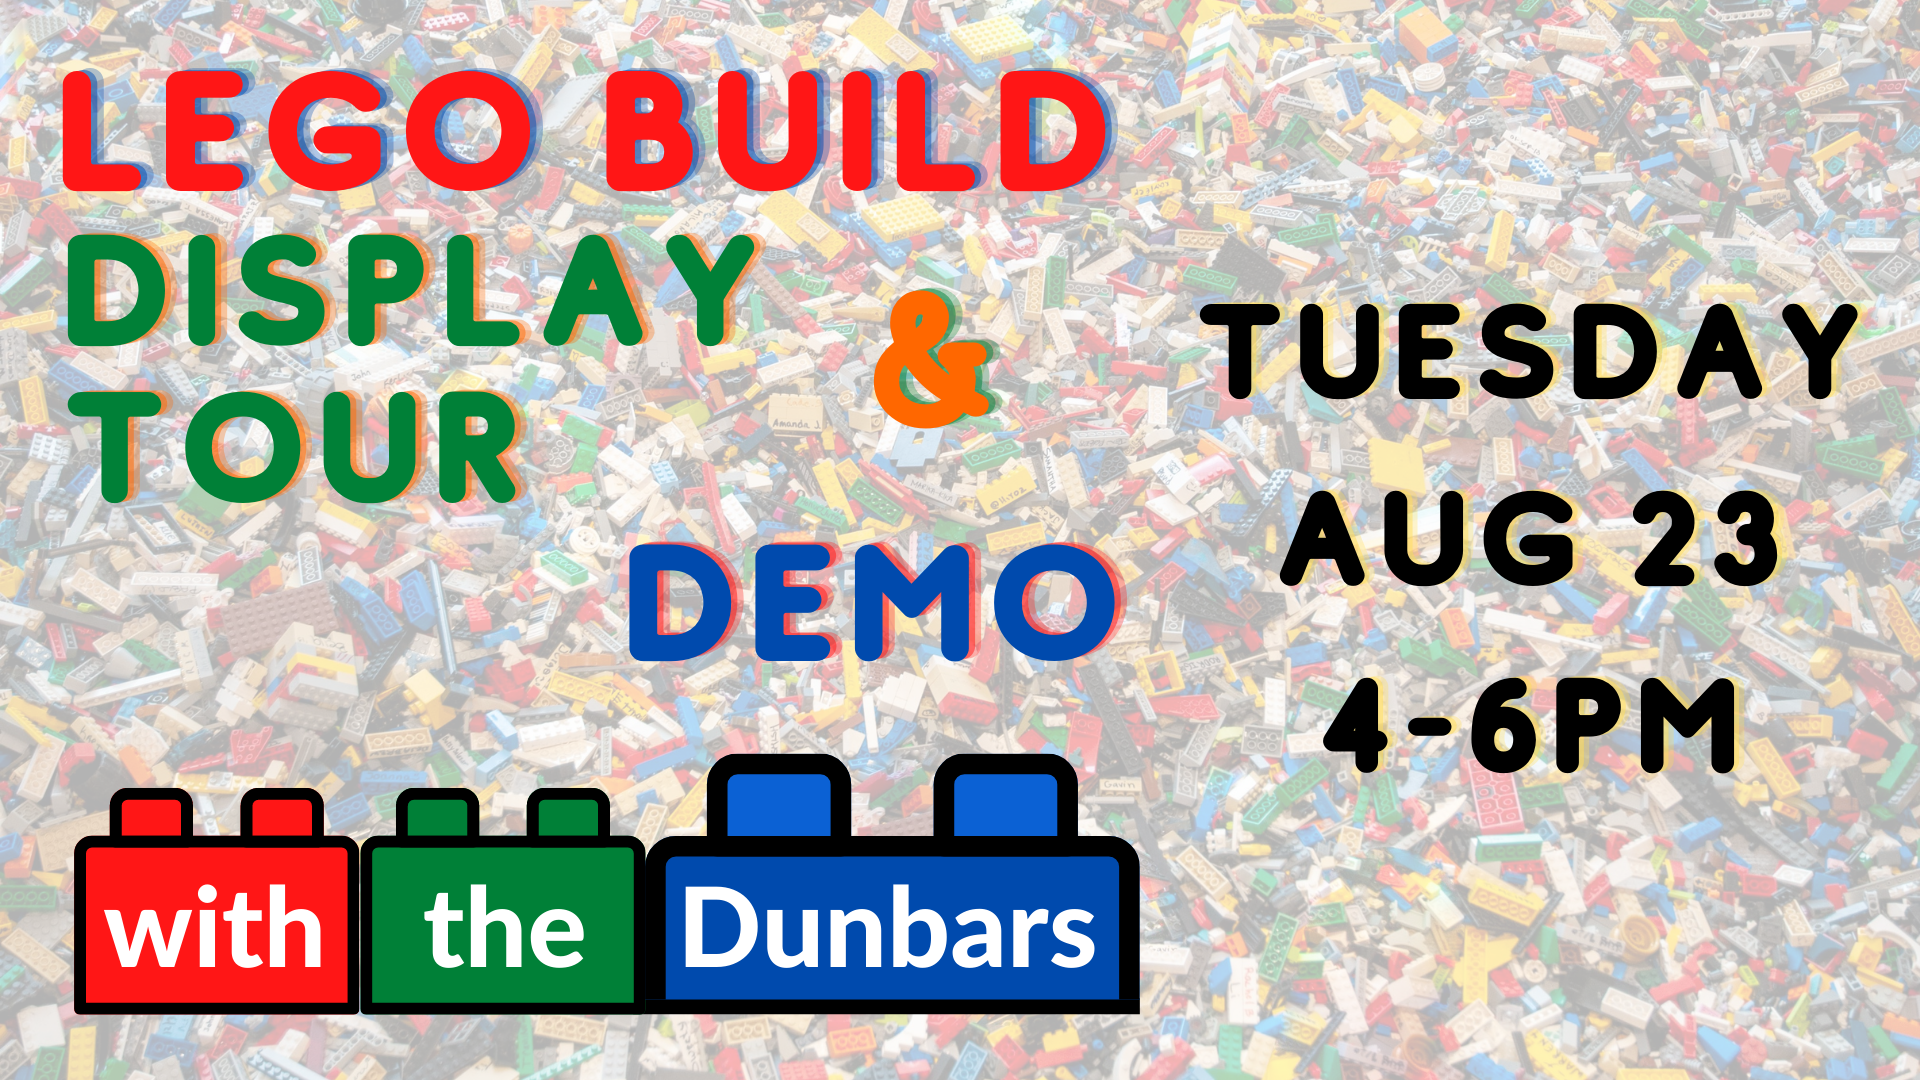 LEGO Demonstrations on August 23rd from 4pm to 6pm